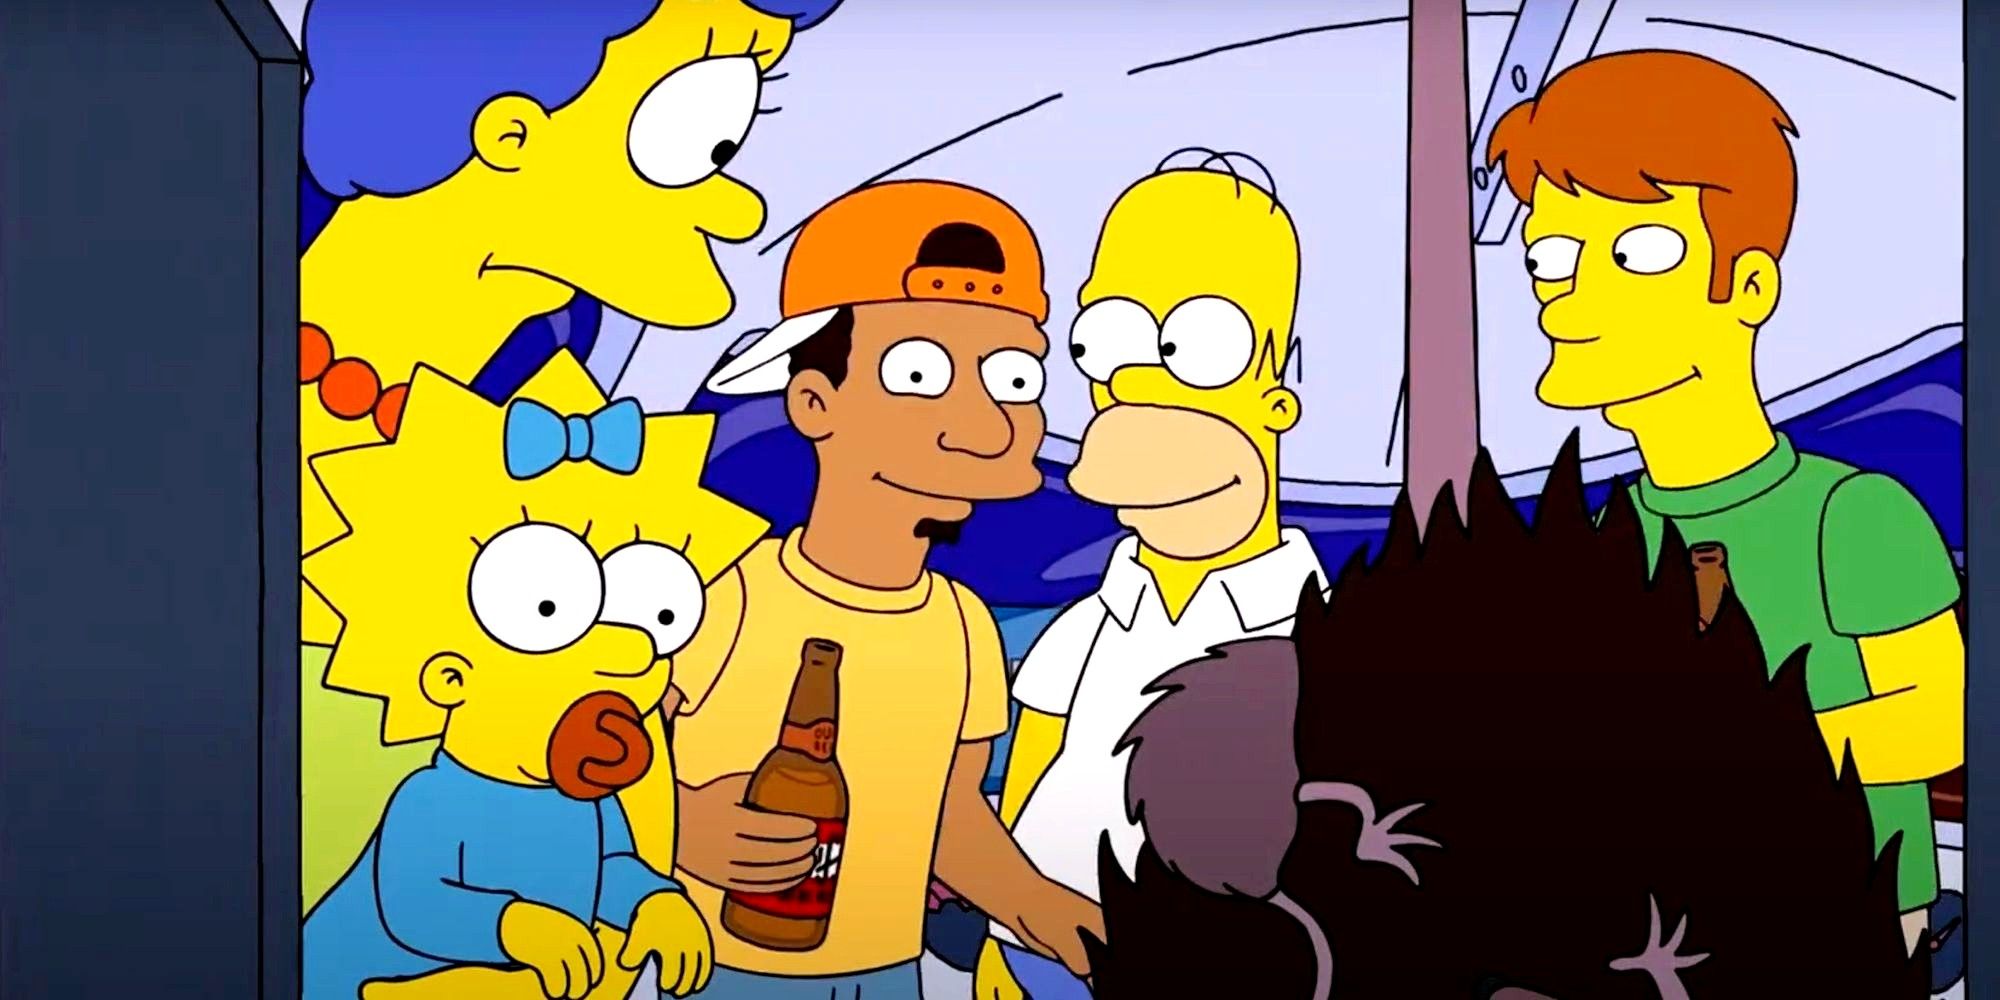 The Simpsons' Gets Full Anime Makeover For 'Death Note' Tribute